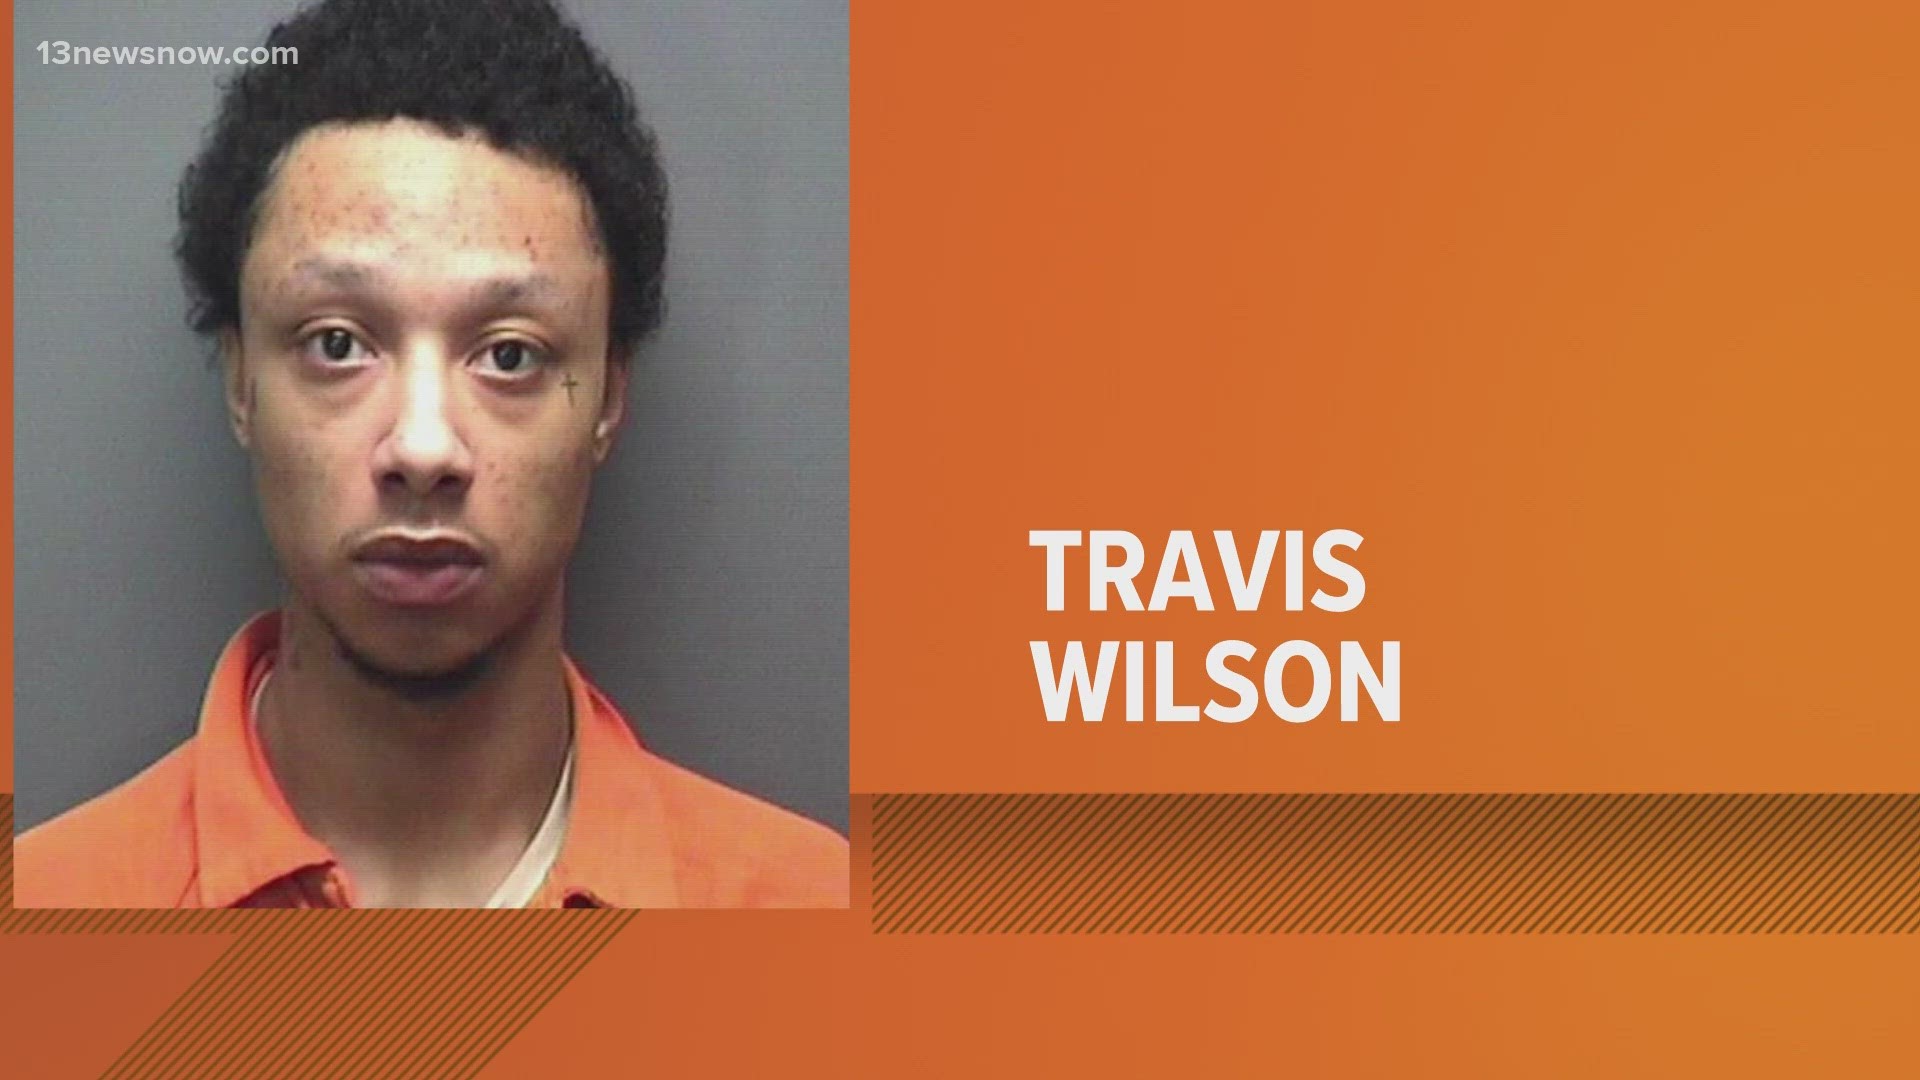 The investigation into this homicide led the Sheriff's Office to identify the suspect as 22-year-old Travis Wilson.